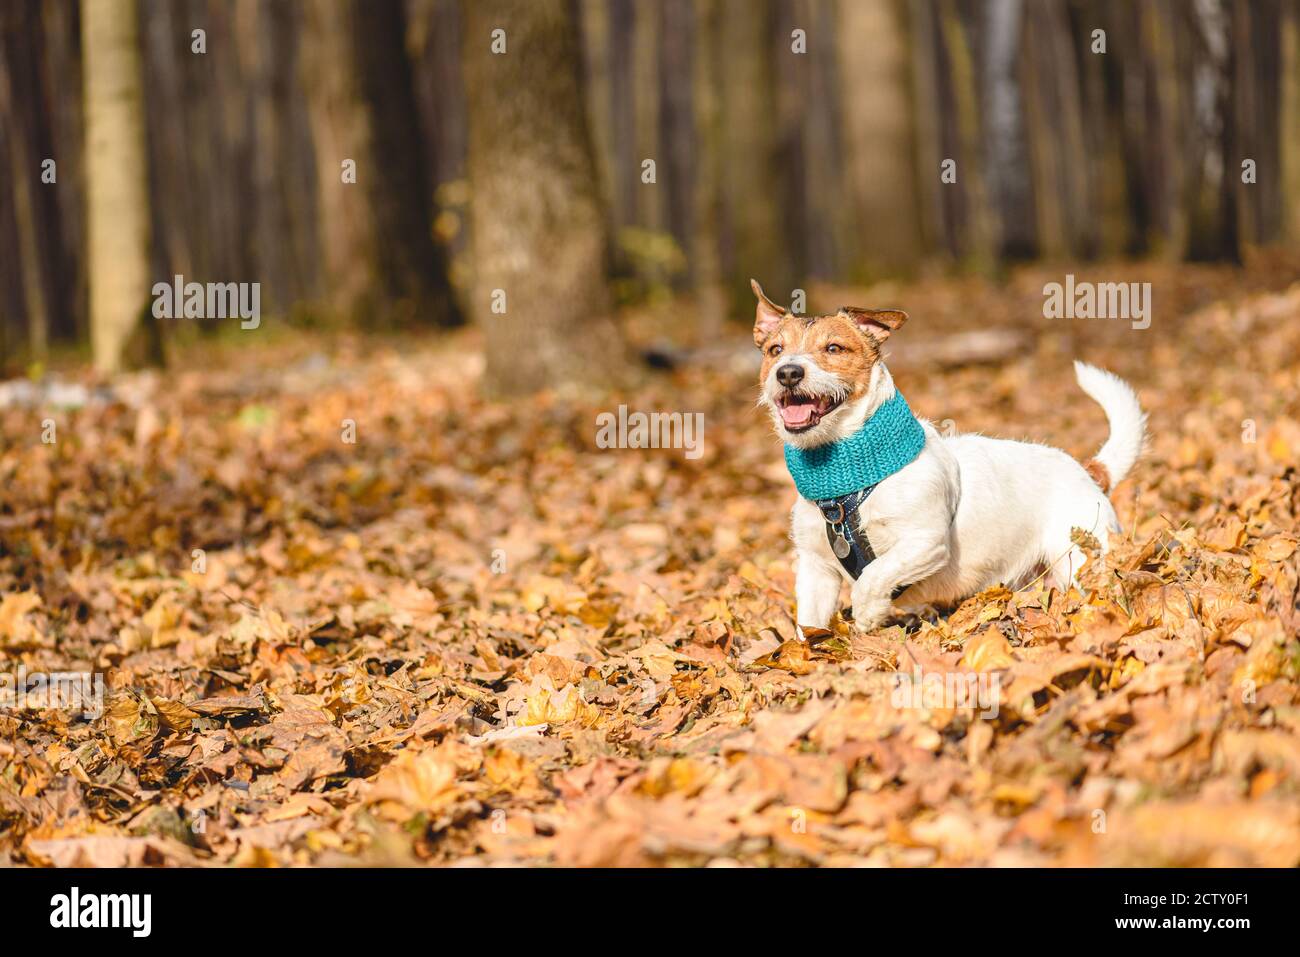 Concept of happy domestic animal with pet dog playing and running in autumn woods on sunny November day Stock Photo